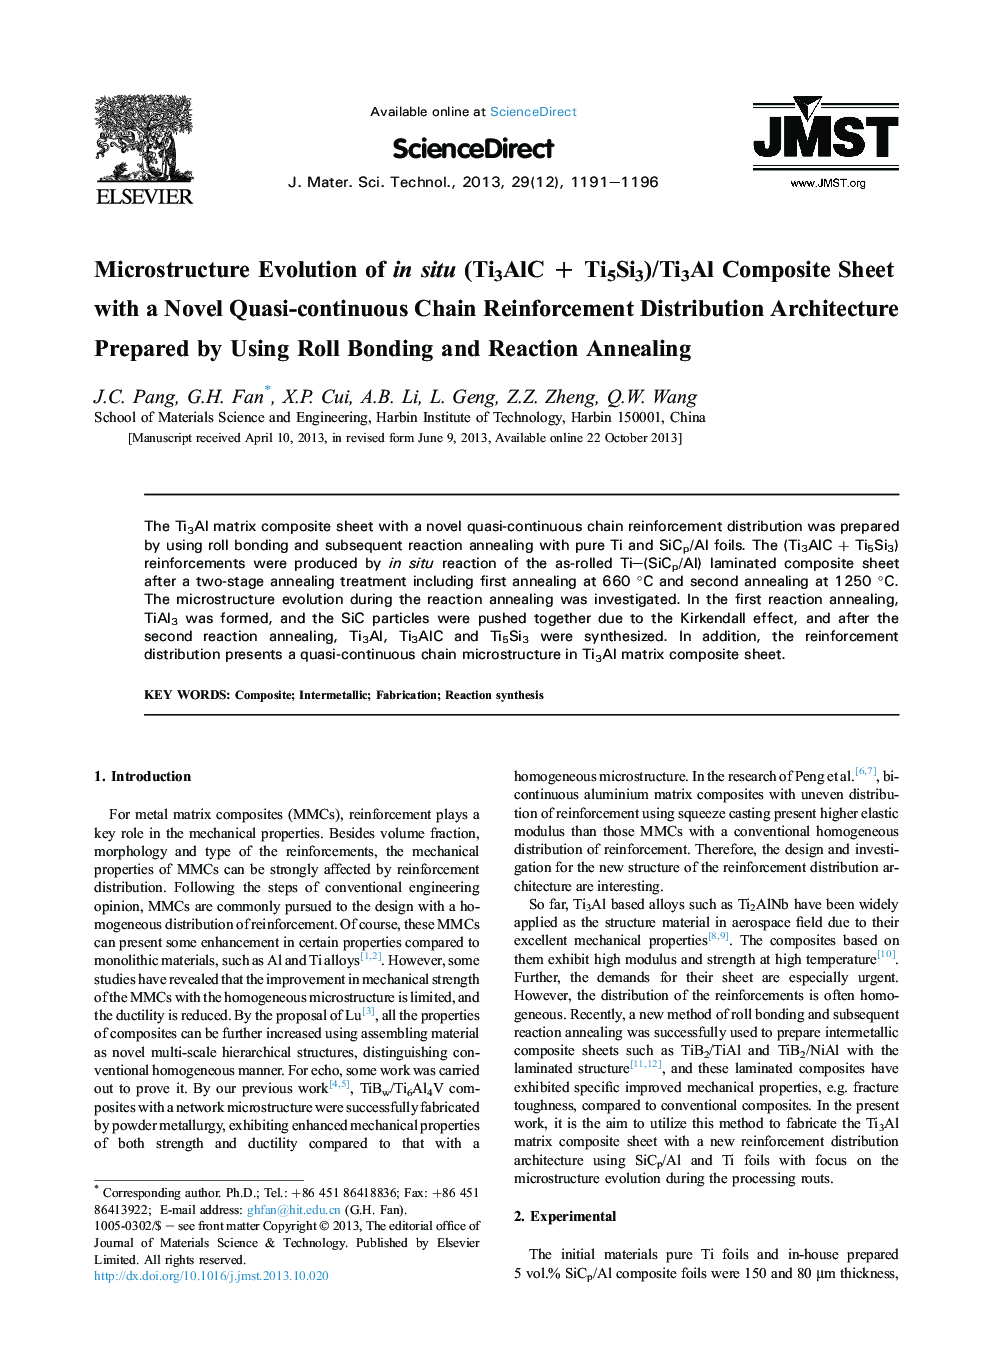 Microstructure Evolution of in situ (Ti3AlC + Ti5Si3)/Ti3Al Composite Sheet with a Novel Quasi-continuous Chain Reinforcement Distribution Architecture Prepared by Using Roll Bonding and Reaction Annealing